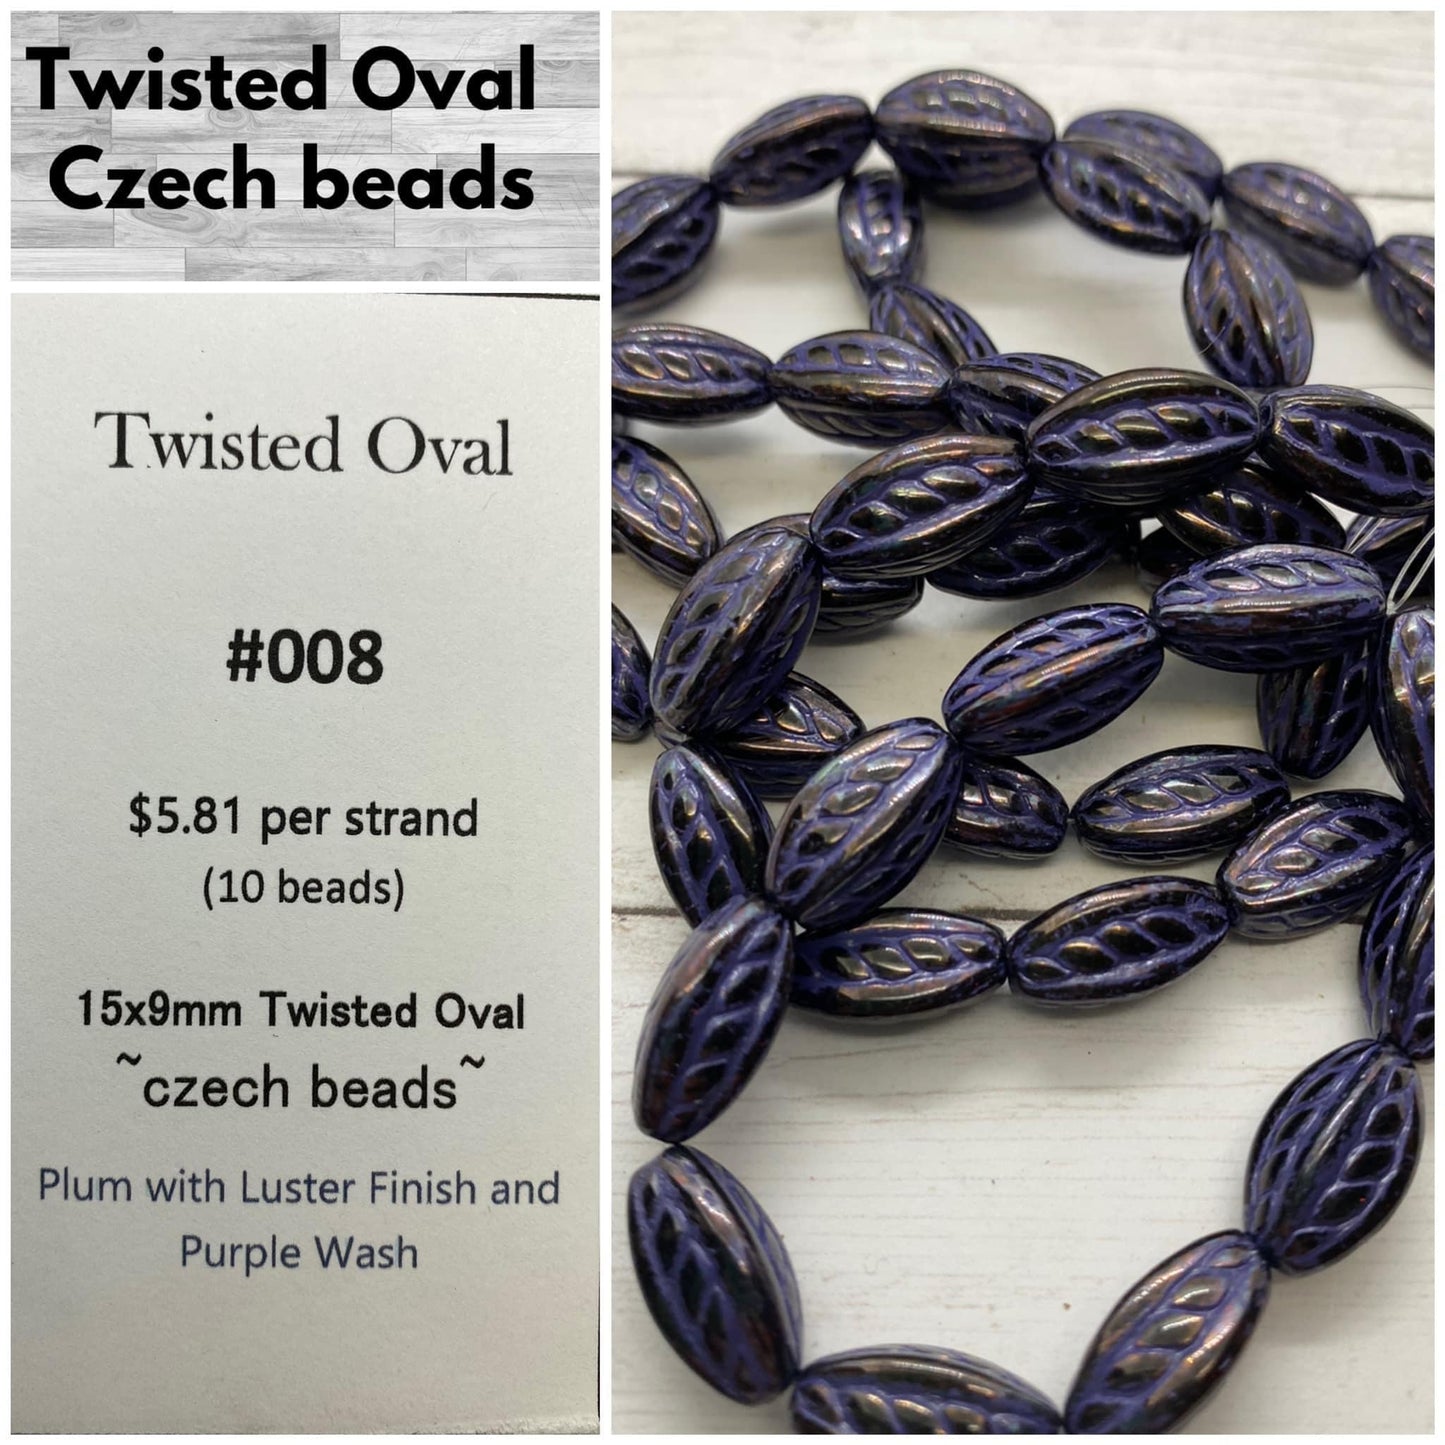 Twisted Oval 15x9mm #008